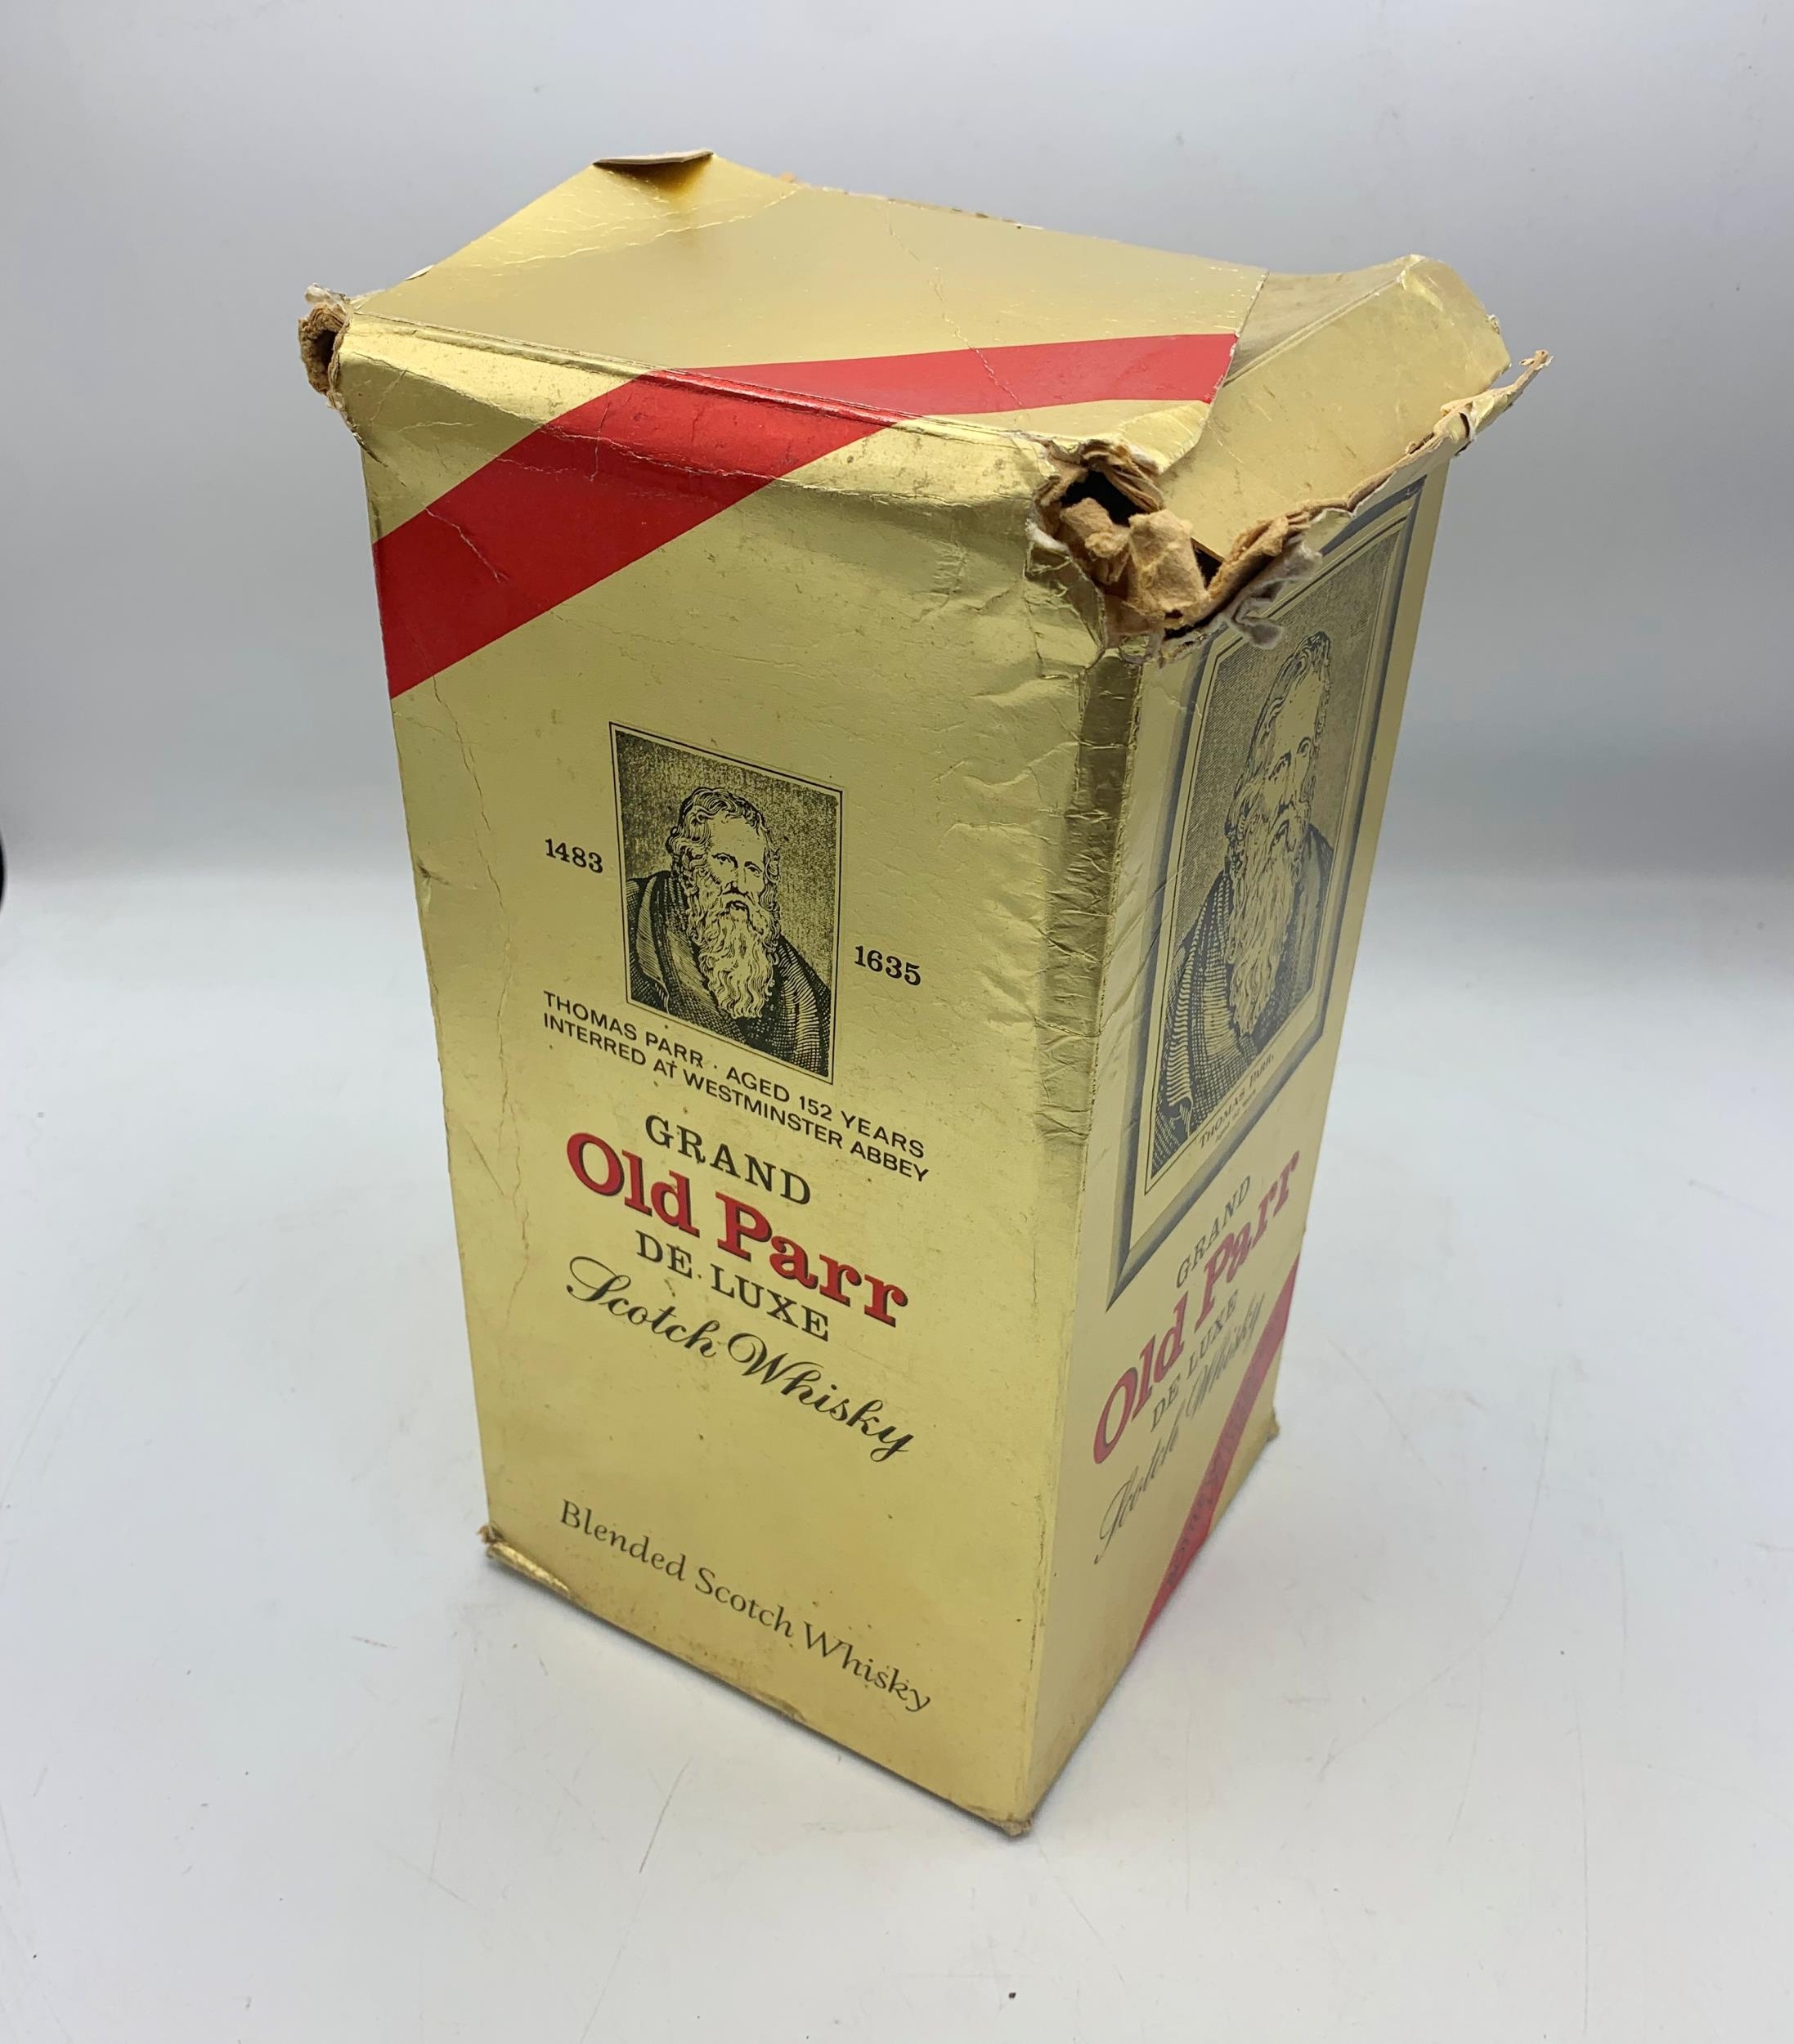 Boxed Grand Old Parr De Luxe Scotch Whisky. Unopened. - Image 4 of 4